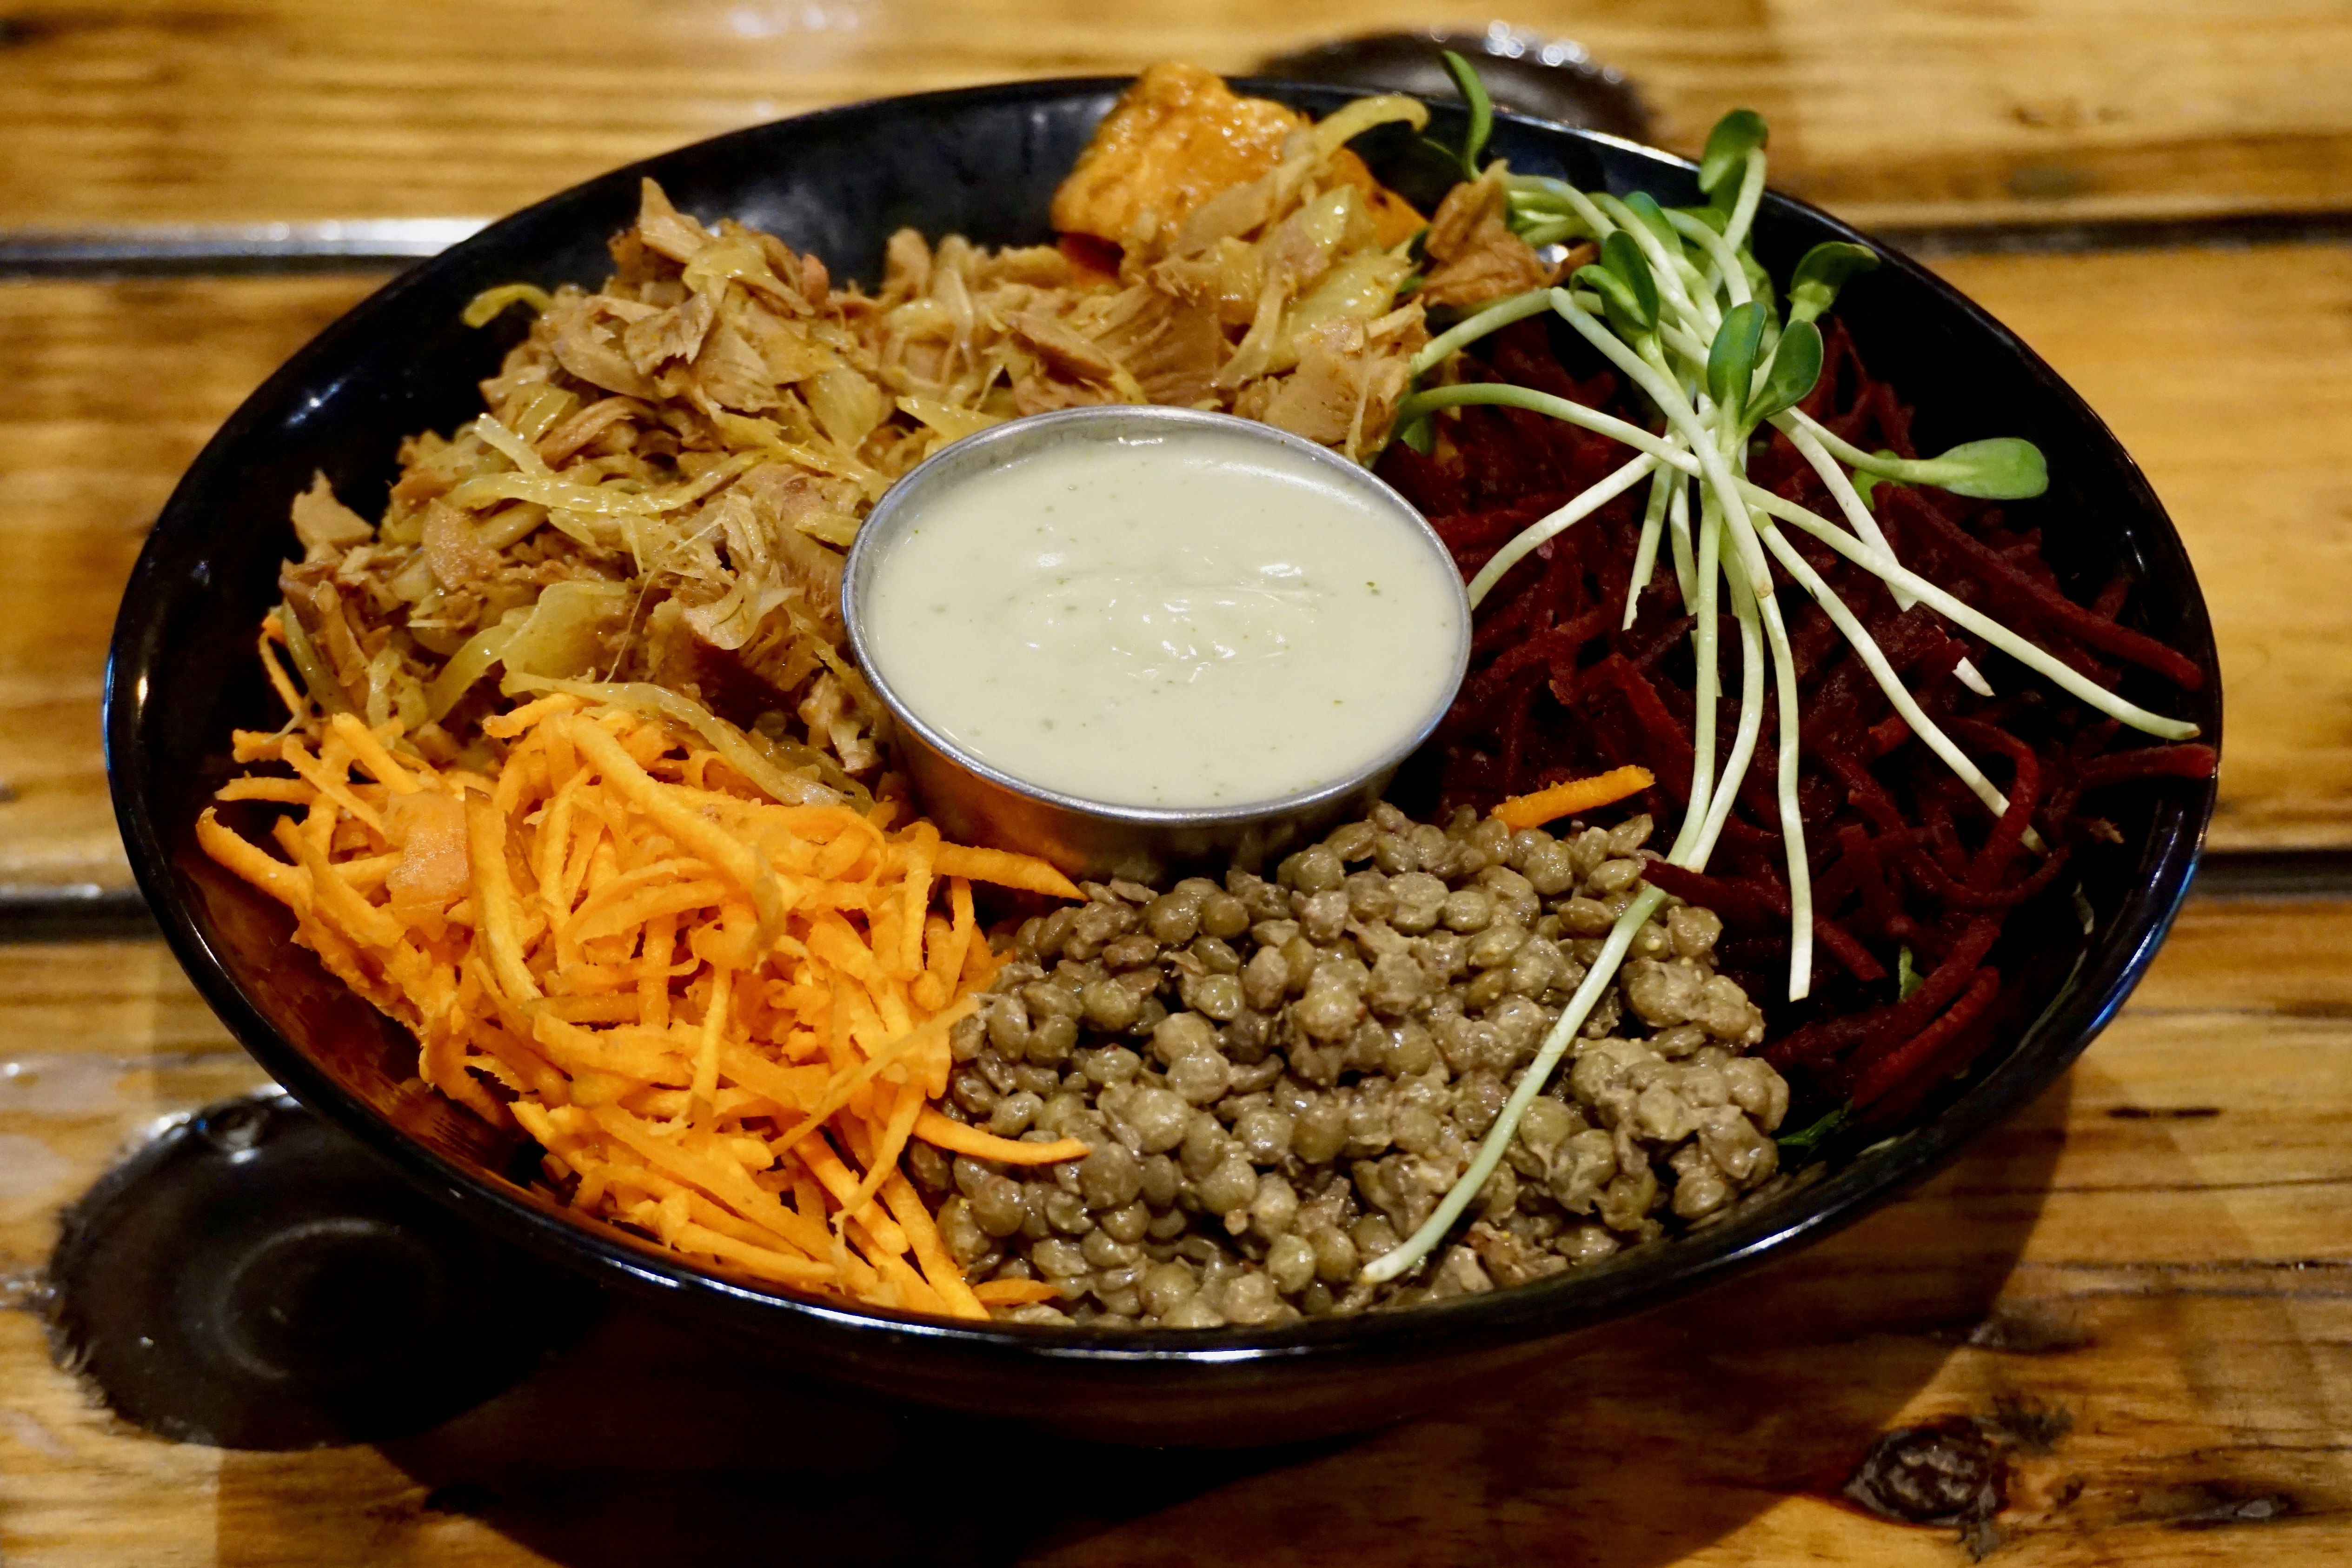 A large black bowl is filled with pulled jackfruit, grated beets and carrots and bulgar wheat. In the middle is a stainless steel ramekin with a white sauce.